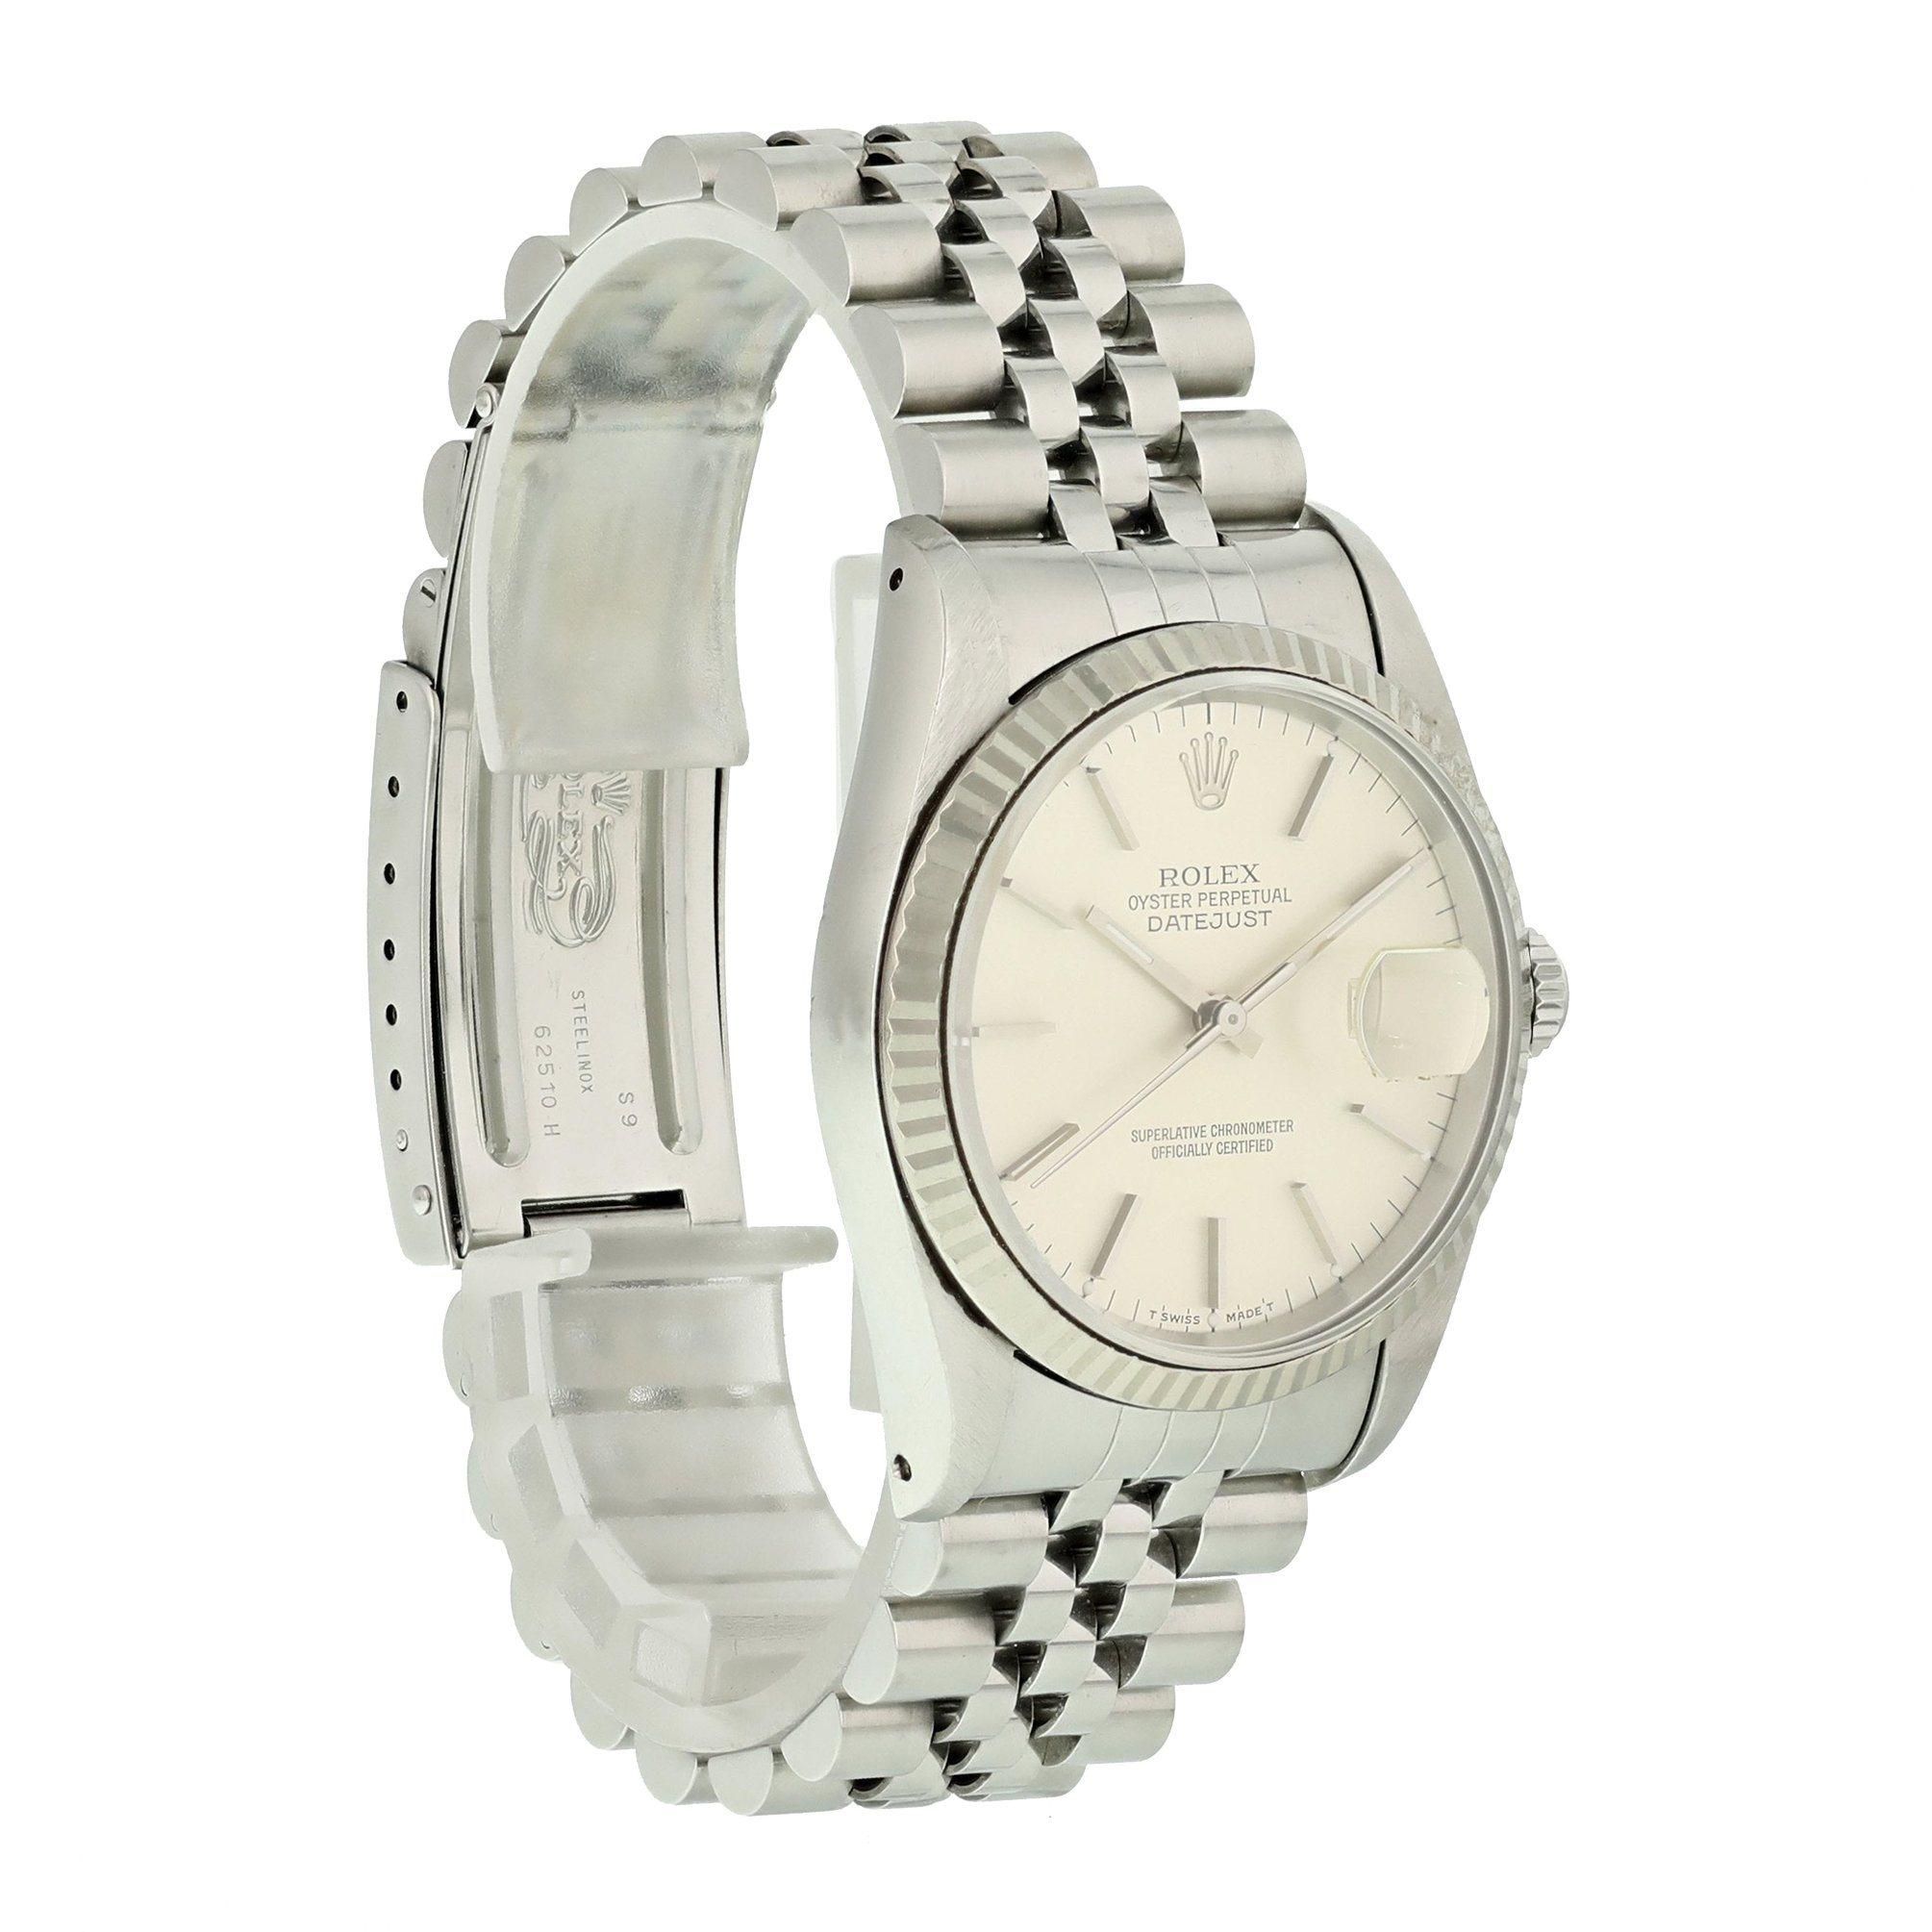 Rolex Oyster Perpetual Datejust 16234 Mens Watch. 
36mm Stainless Steel case. 
White Gold Stationary bezel. 
Silver dial with Luminous Steel hands and index hour markers. 
Minute markers on the outer dial. 
Date display at the 3 o'clock position.